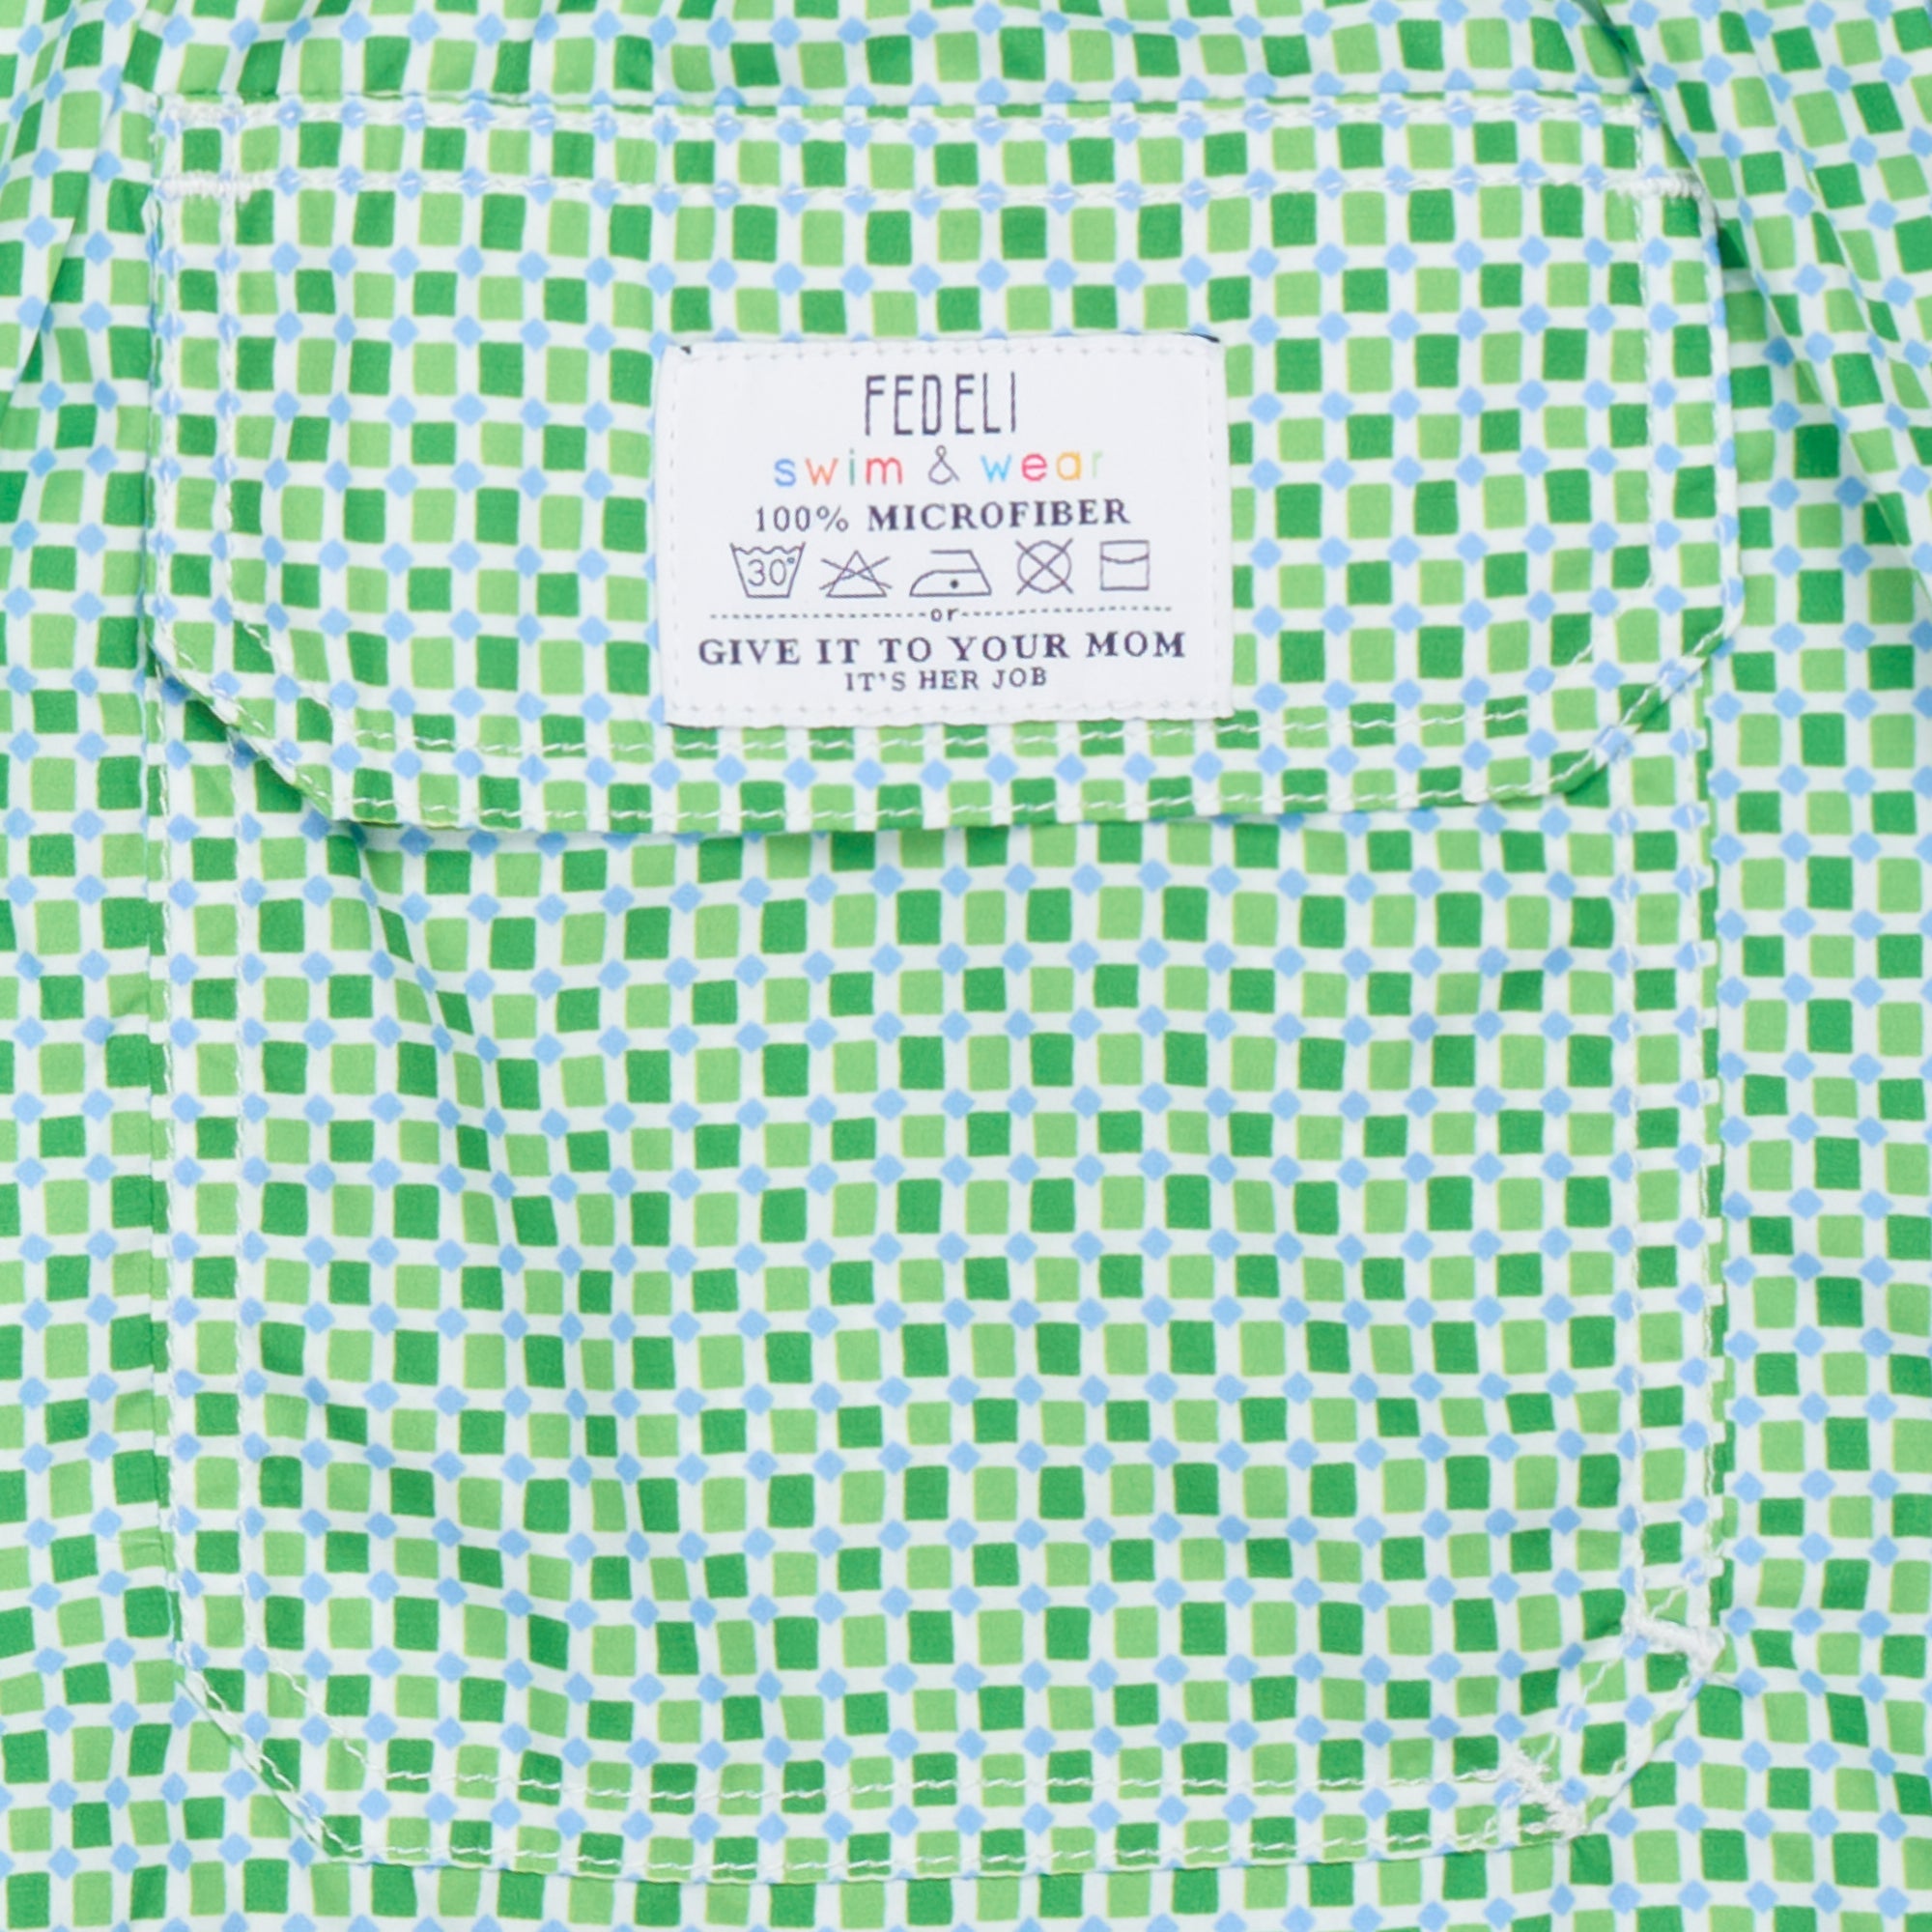 FEDELI Green Checkered Printed Madeira Airstop Trunks Swim Shorts NEW 2XL